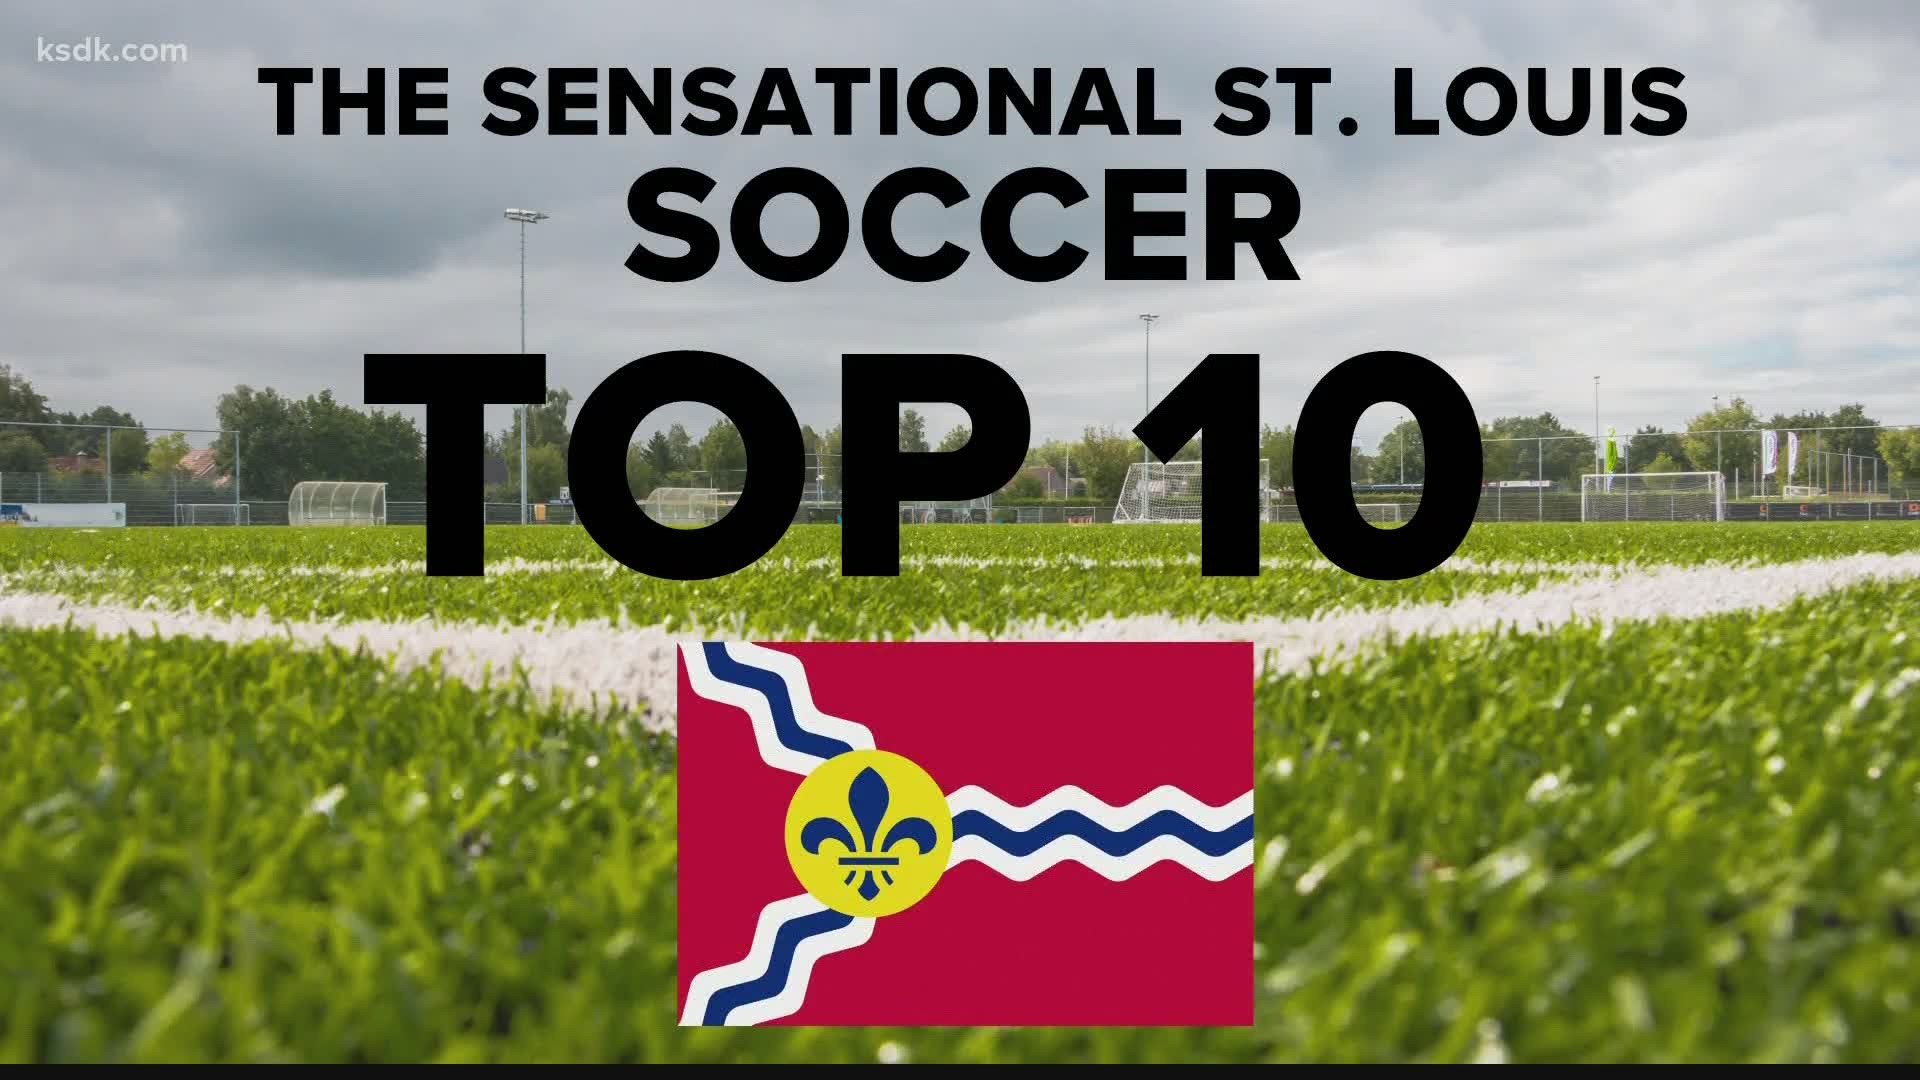 It's no secret that our town is a soccer hotbed. But who's the best to ever come out of St. Louis? We count them down